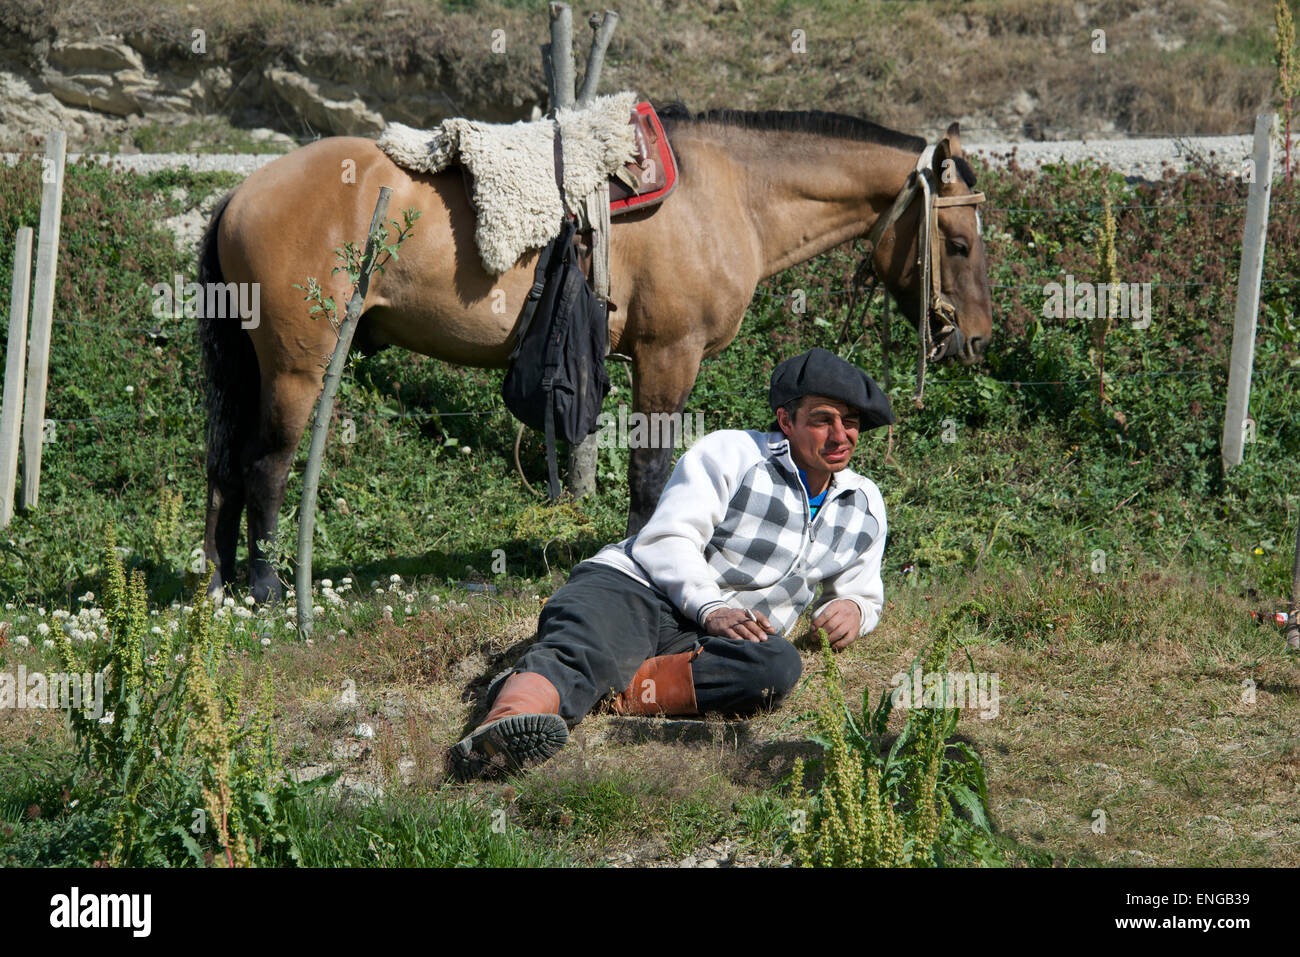 Gaucho with horse relaxing country rodeo Tierra del Fuego Argentina Stock Photo